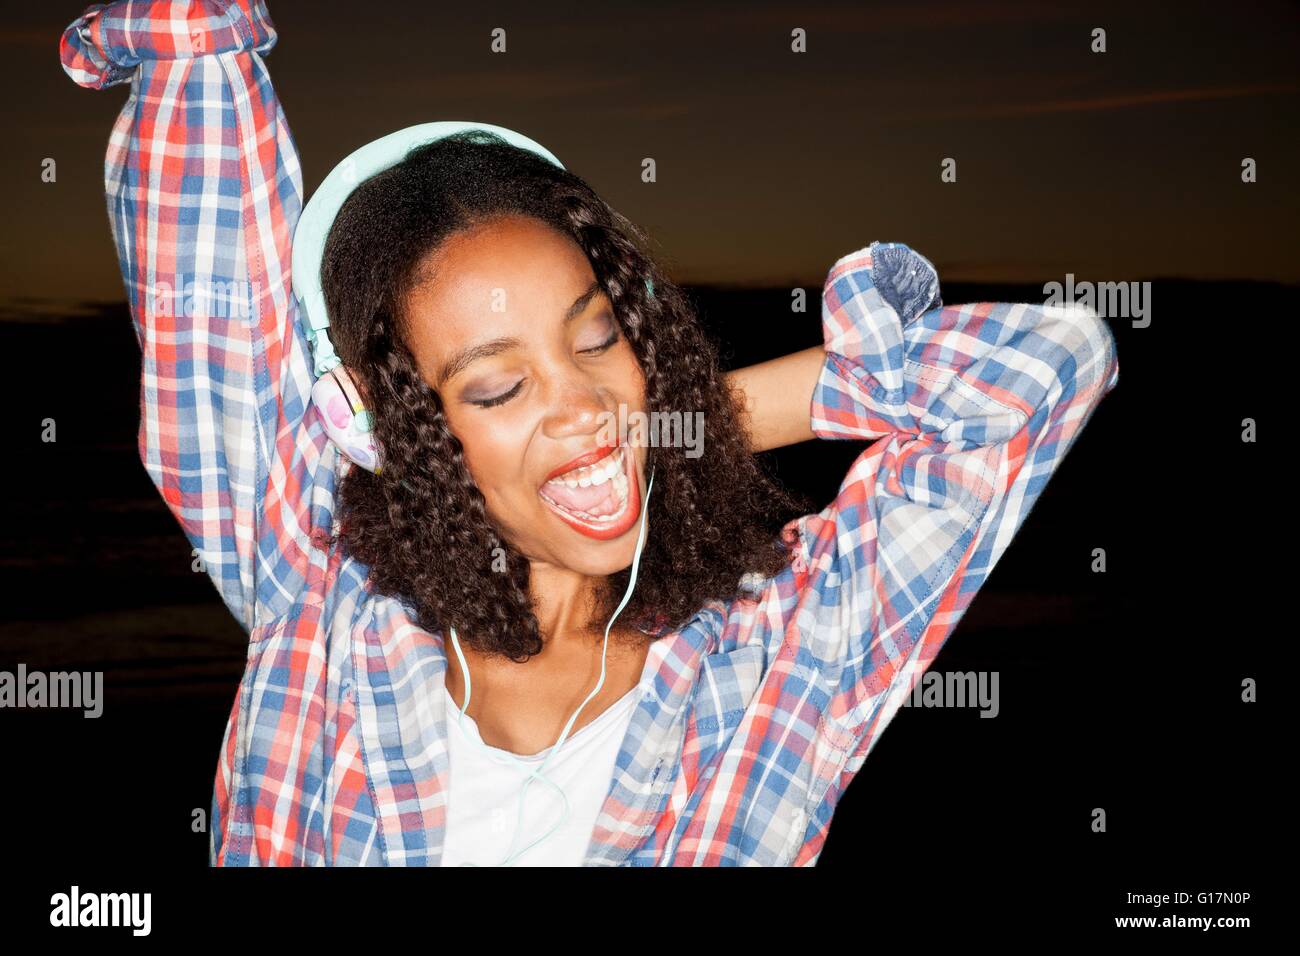 Young woman wearing headphones arm raised, eyes closed open mouthed smiling Stock Photo